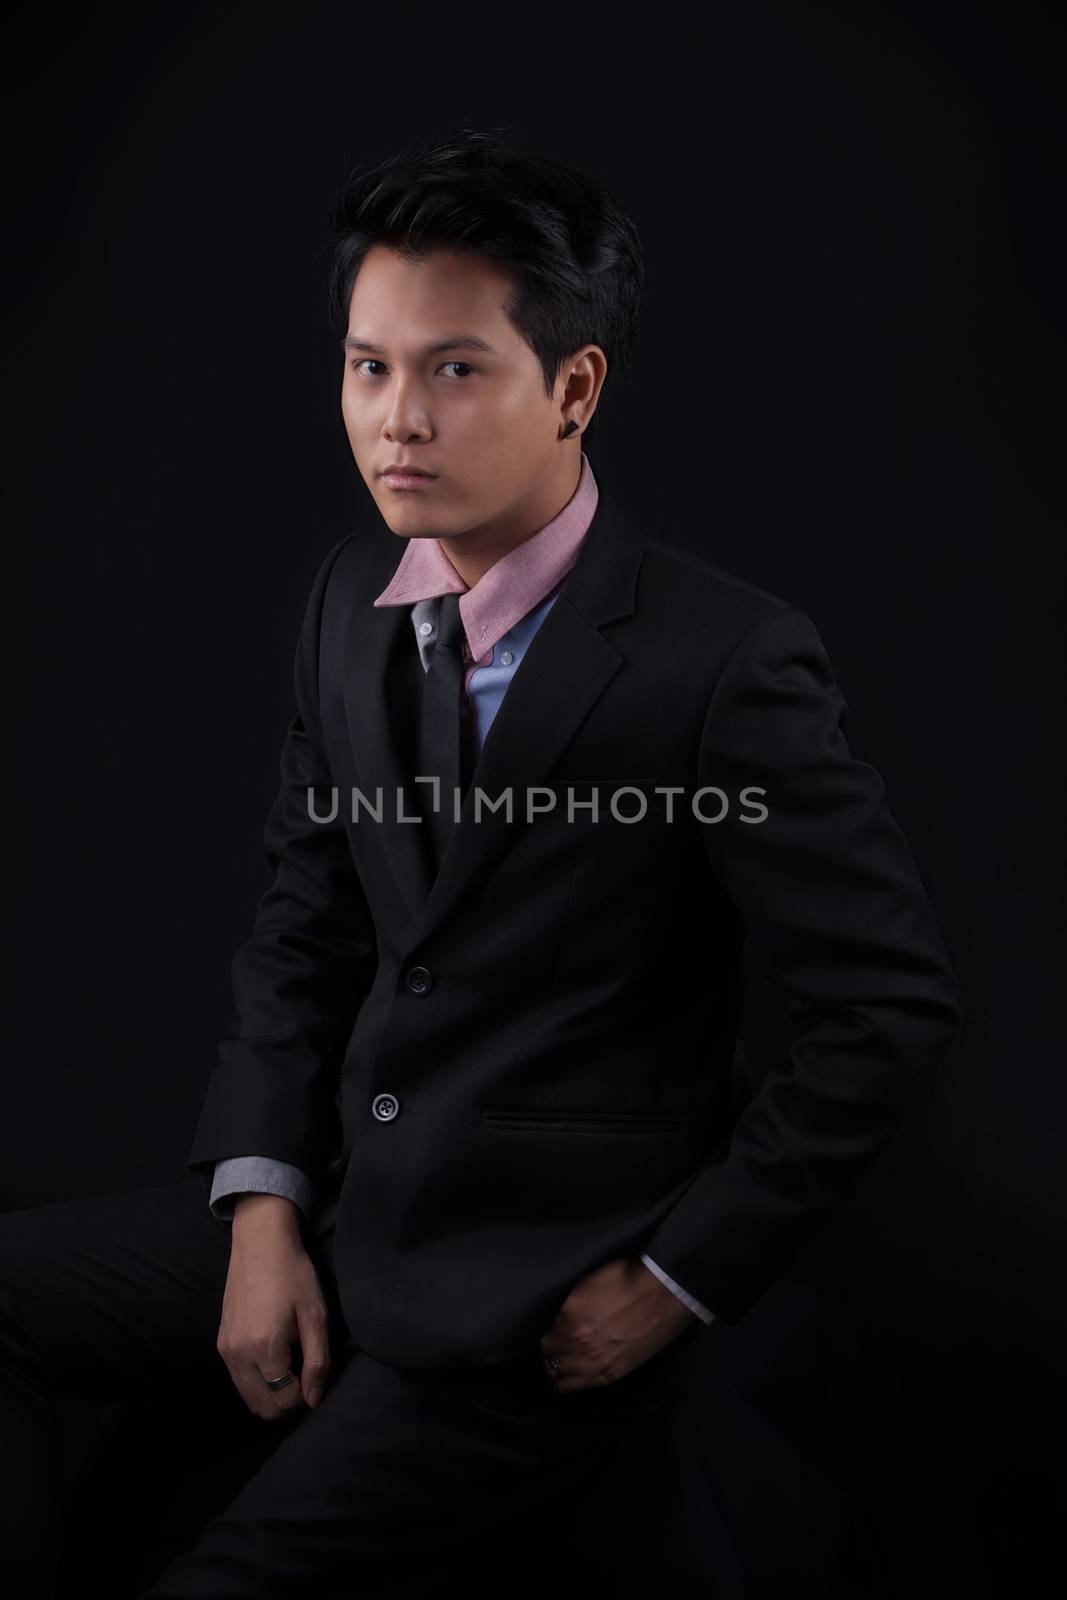 Portrait of Asian young man - Business concept by imagincy